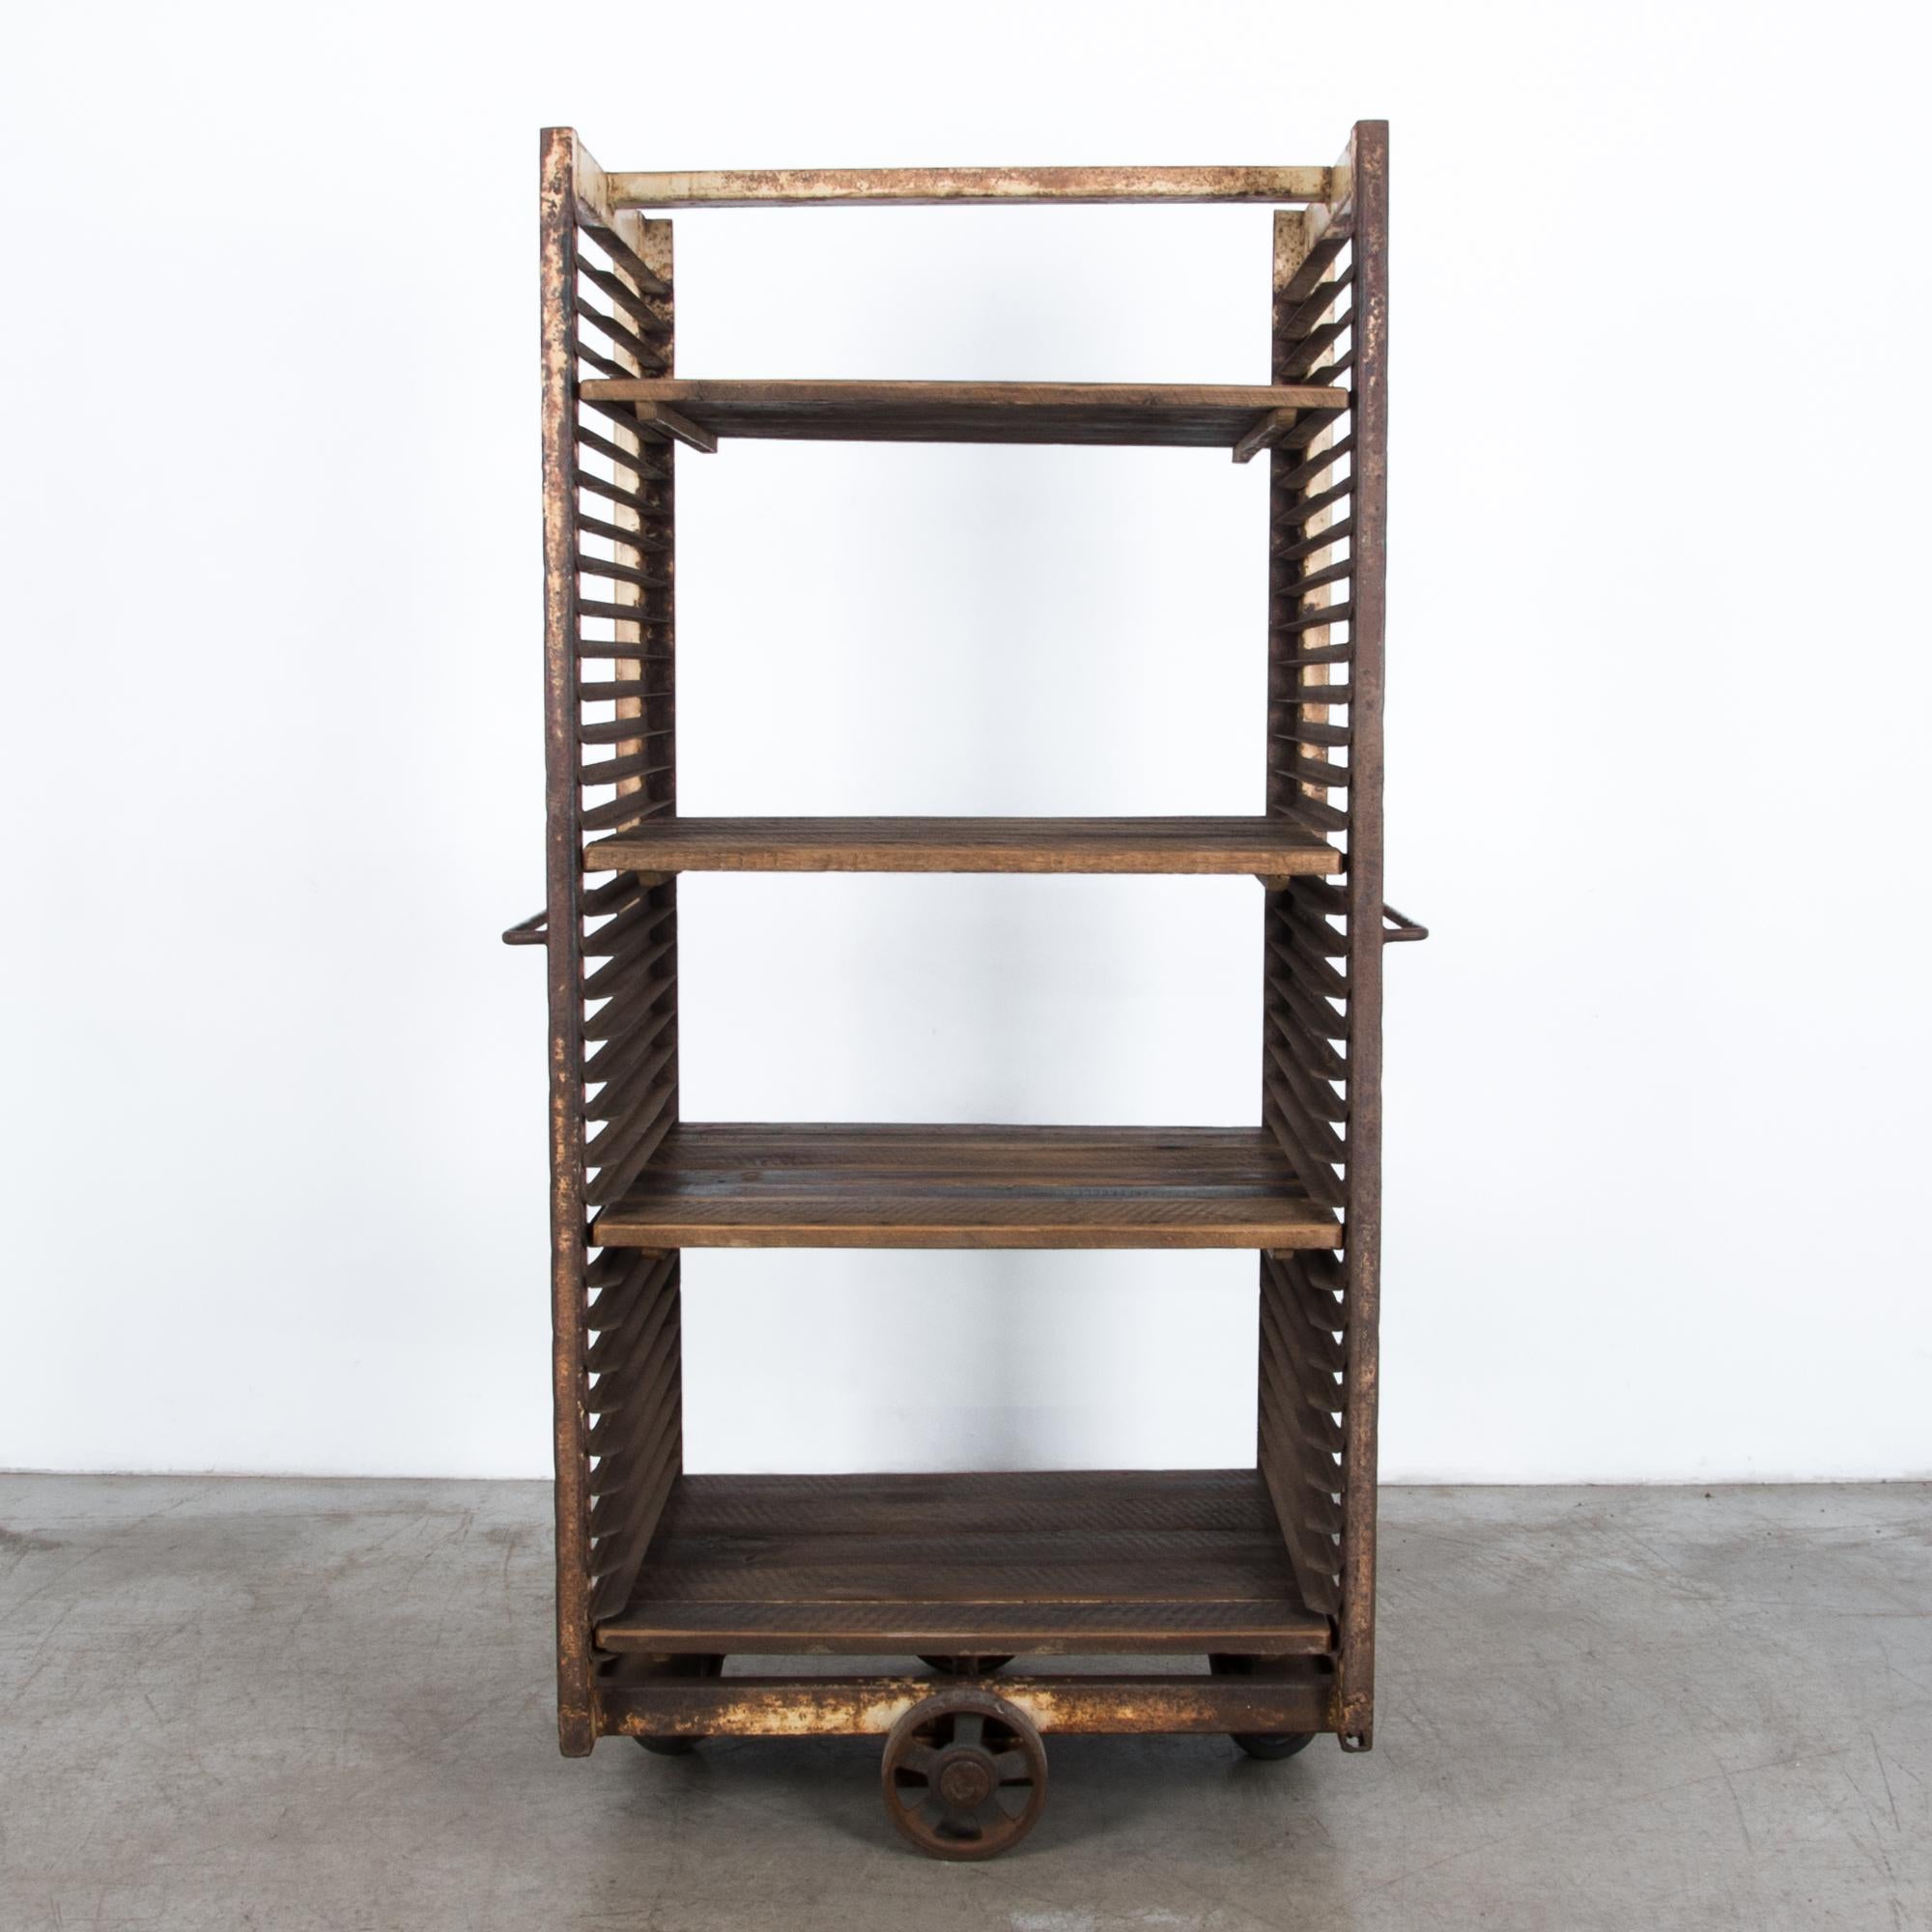 From France circa 1950, a tall wheeled iron cart with adjustable wooden shelves. With a thick textured patina worn by years of use, this shelving unit brings an industrial touch to a space needing texture.